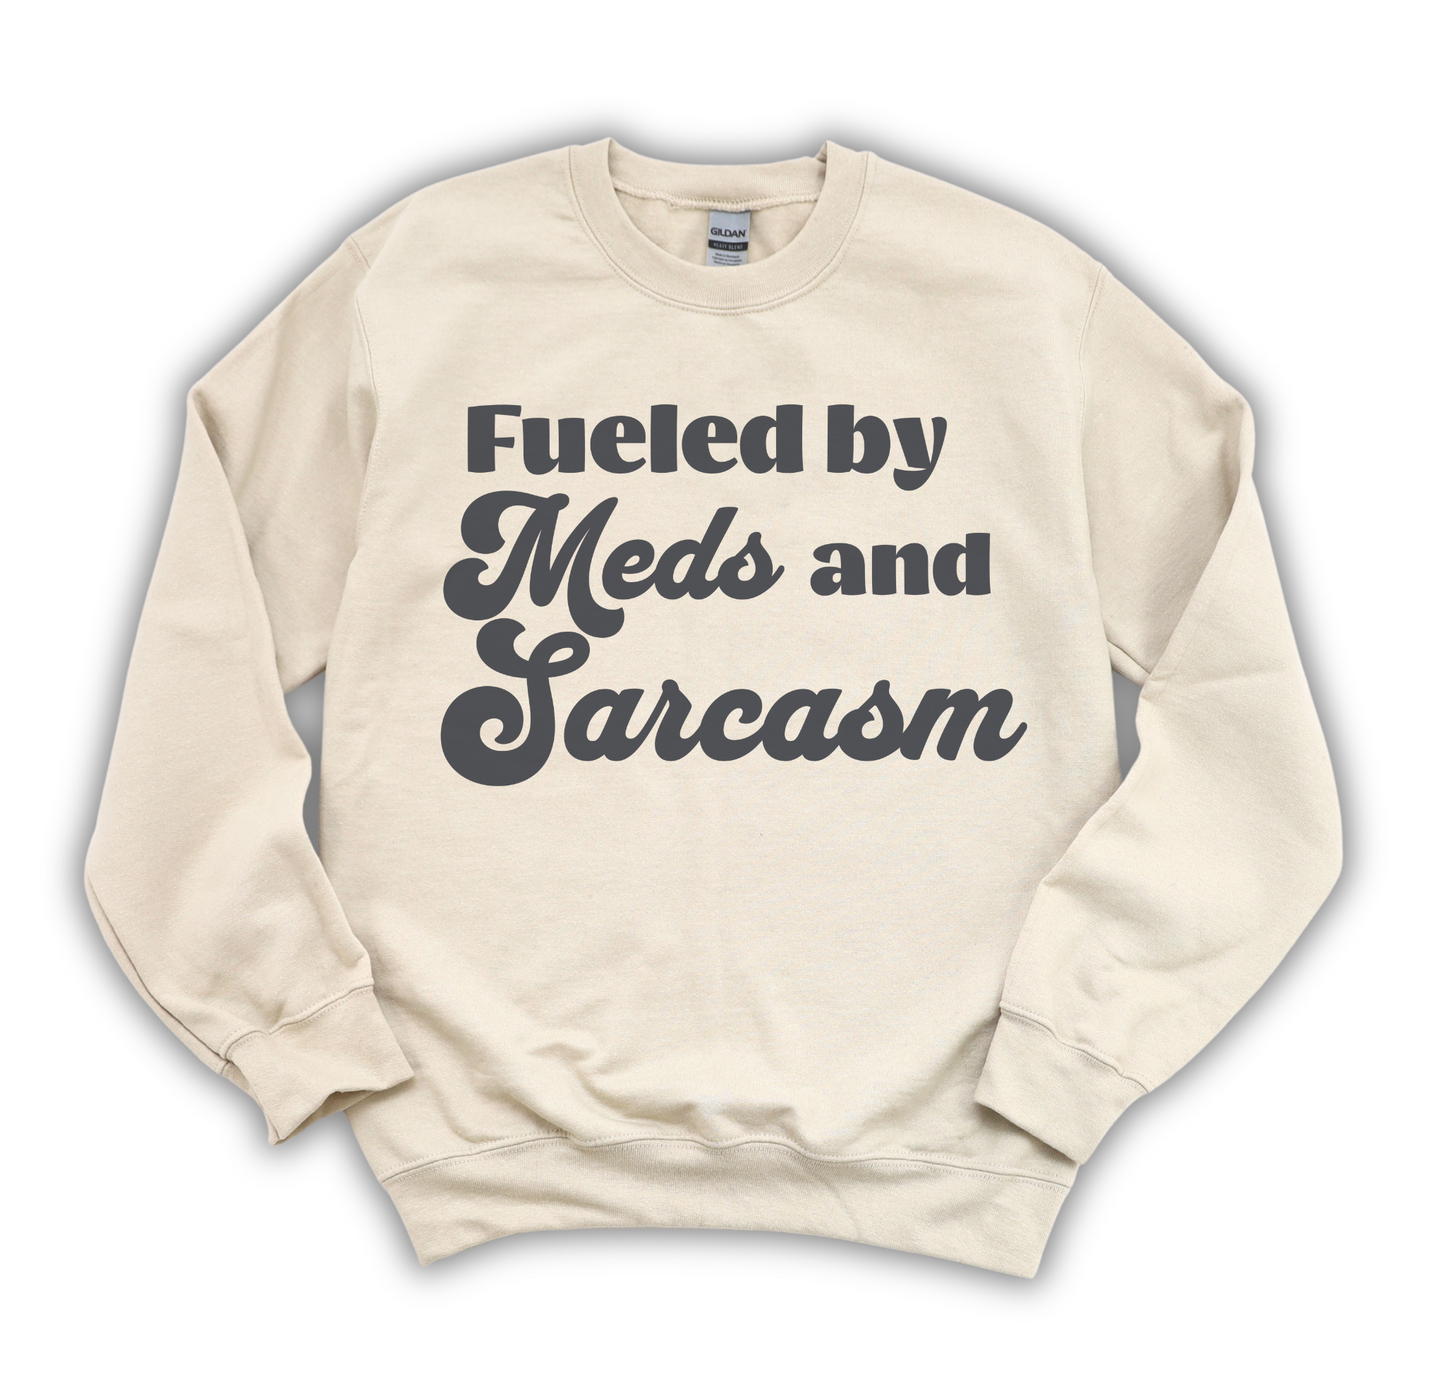 Fueled By Meds and Sarcasm Sweatshirt